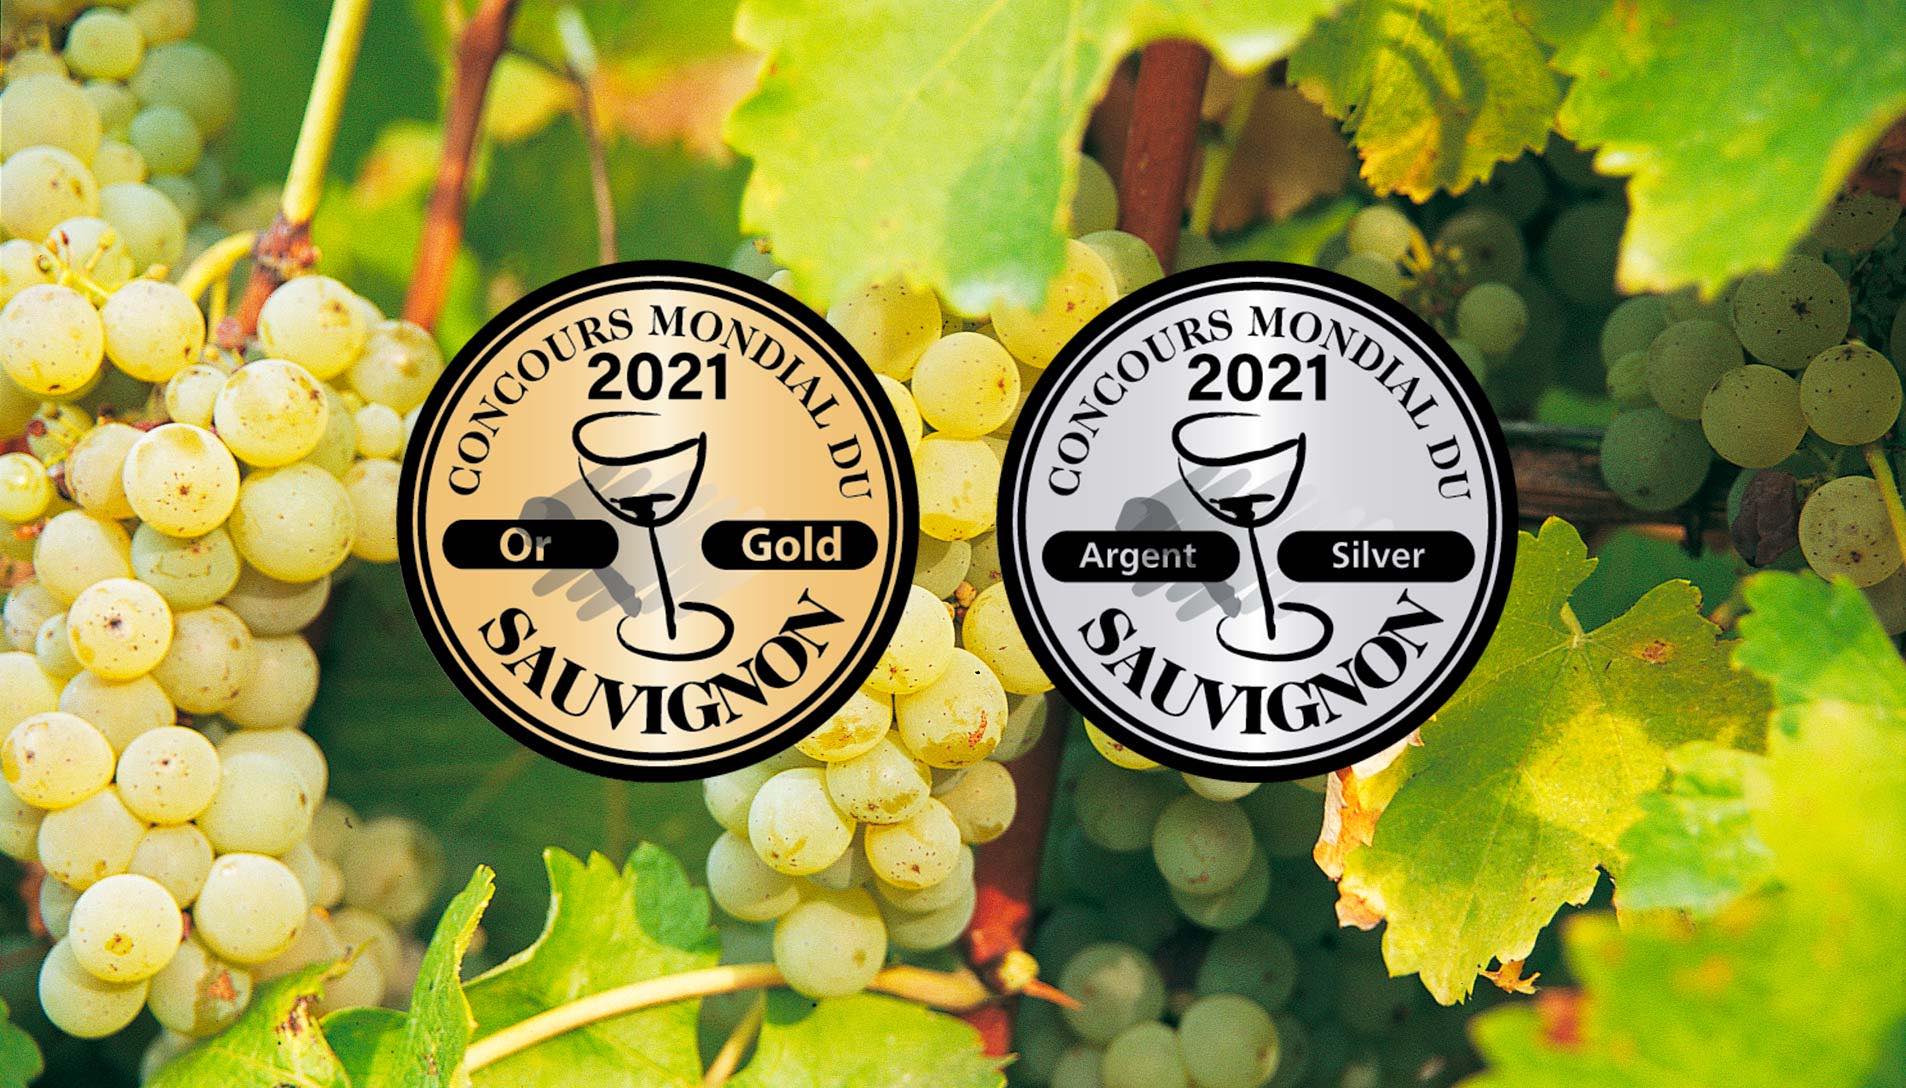 Concours Mondial du Sauvignon: the results are out!